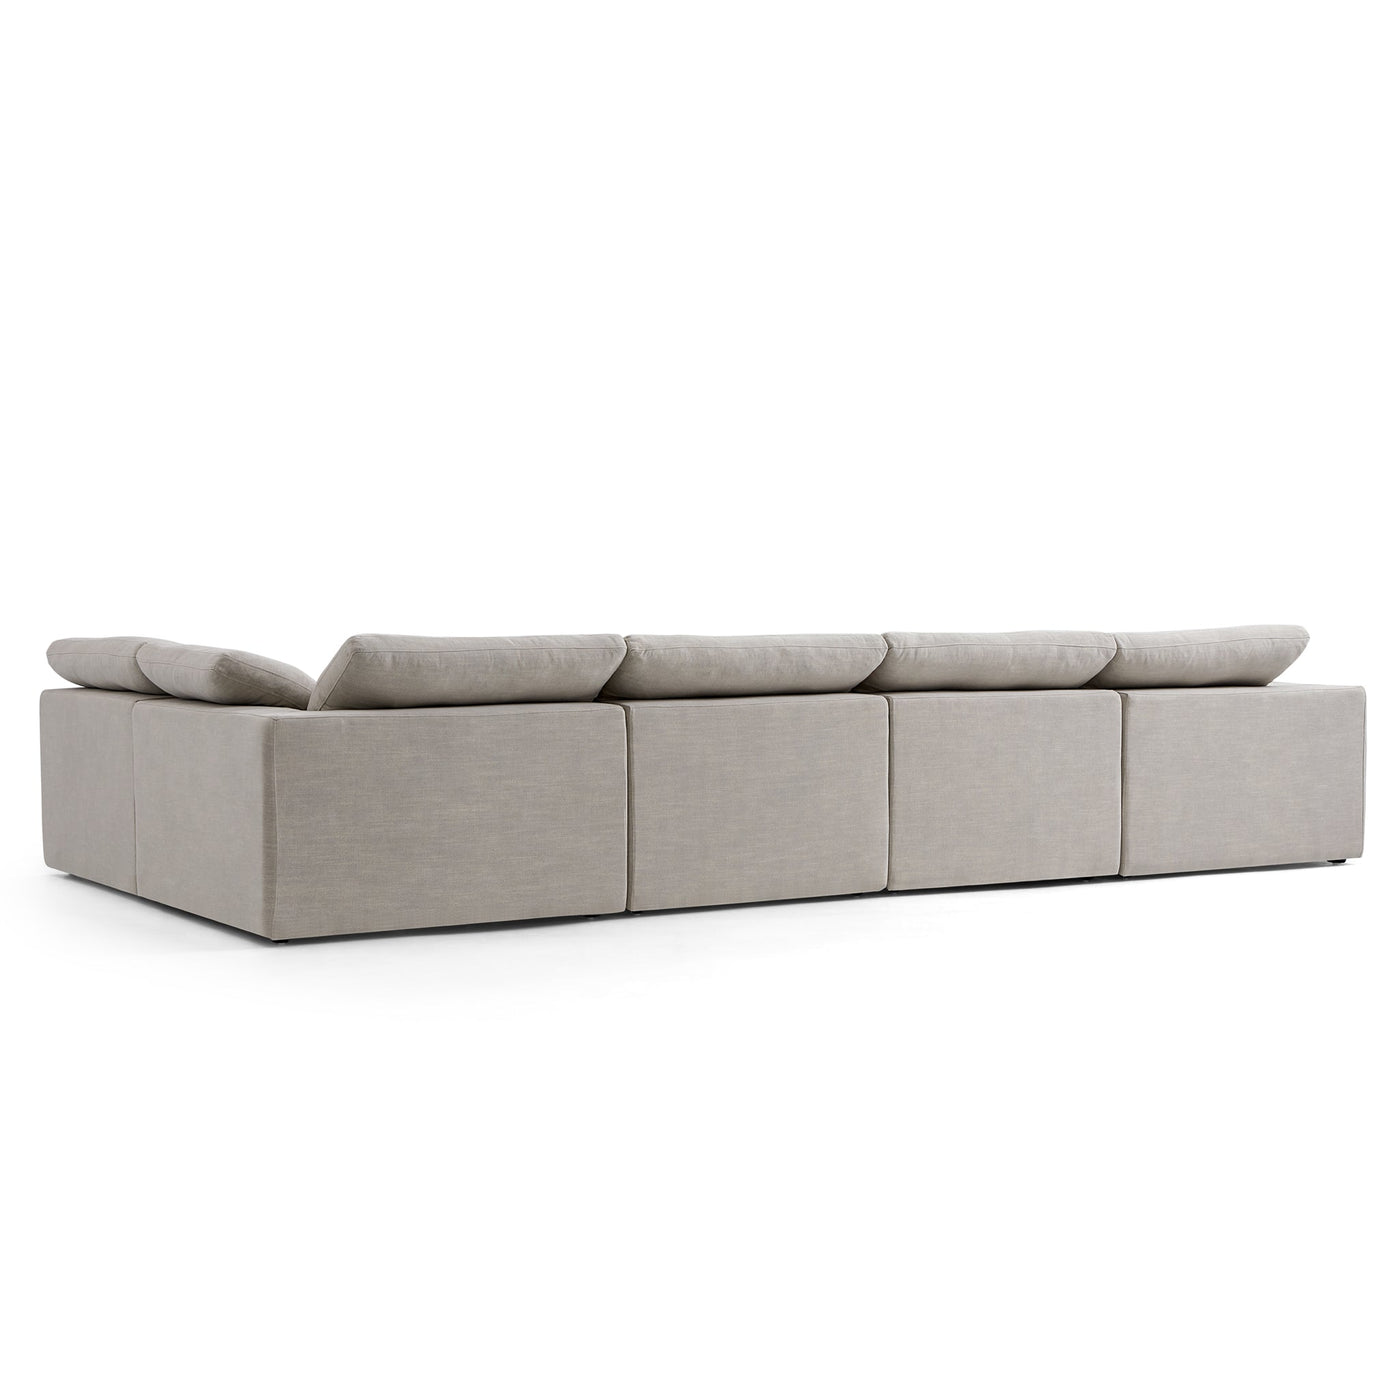 Tender Wabi Sabi Sand U Shaped Sectional with Open Ends-Sand-165.4"